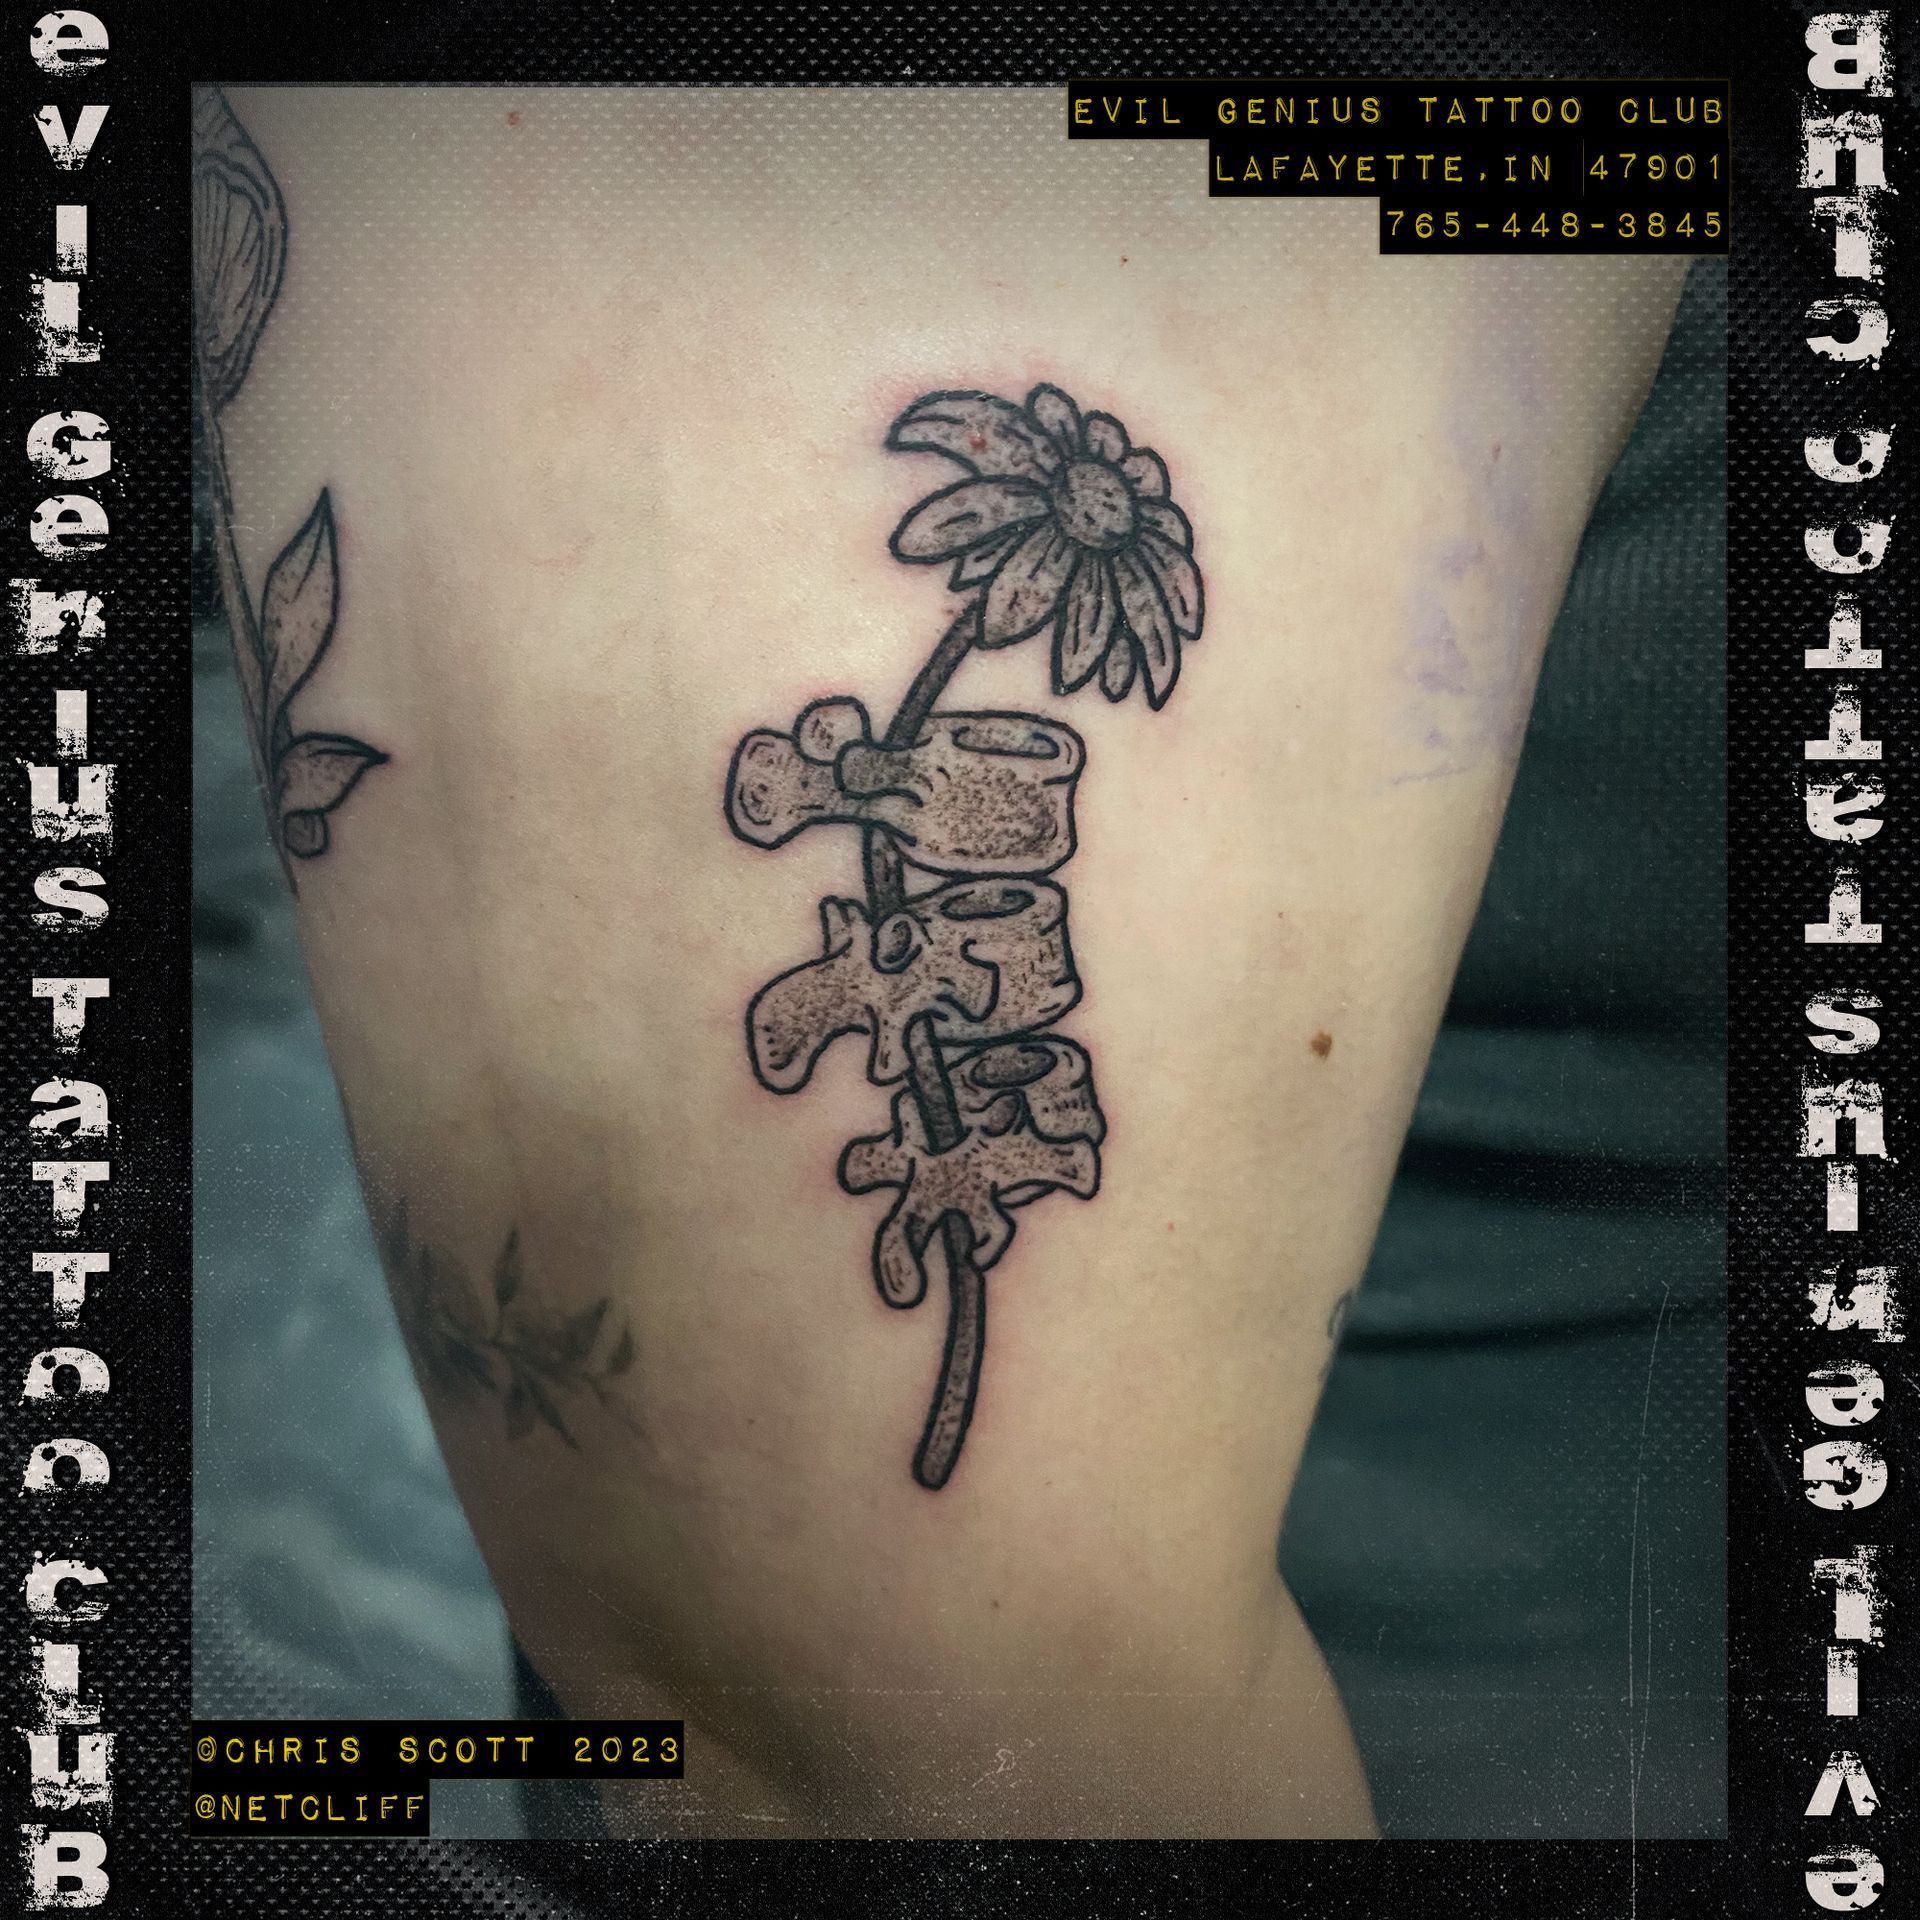 spinal cord daisy tattoo by Chris Scott